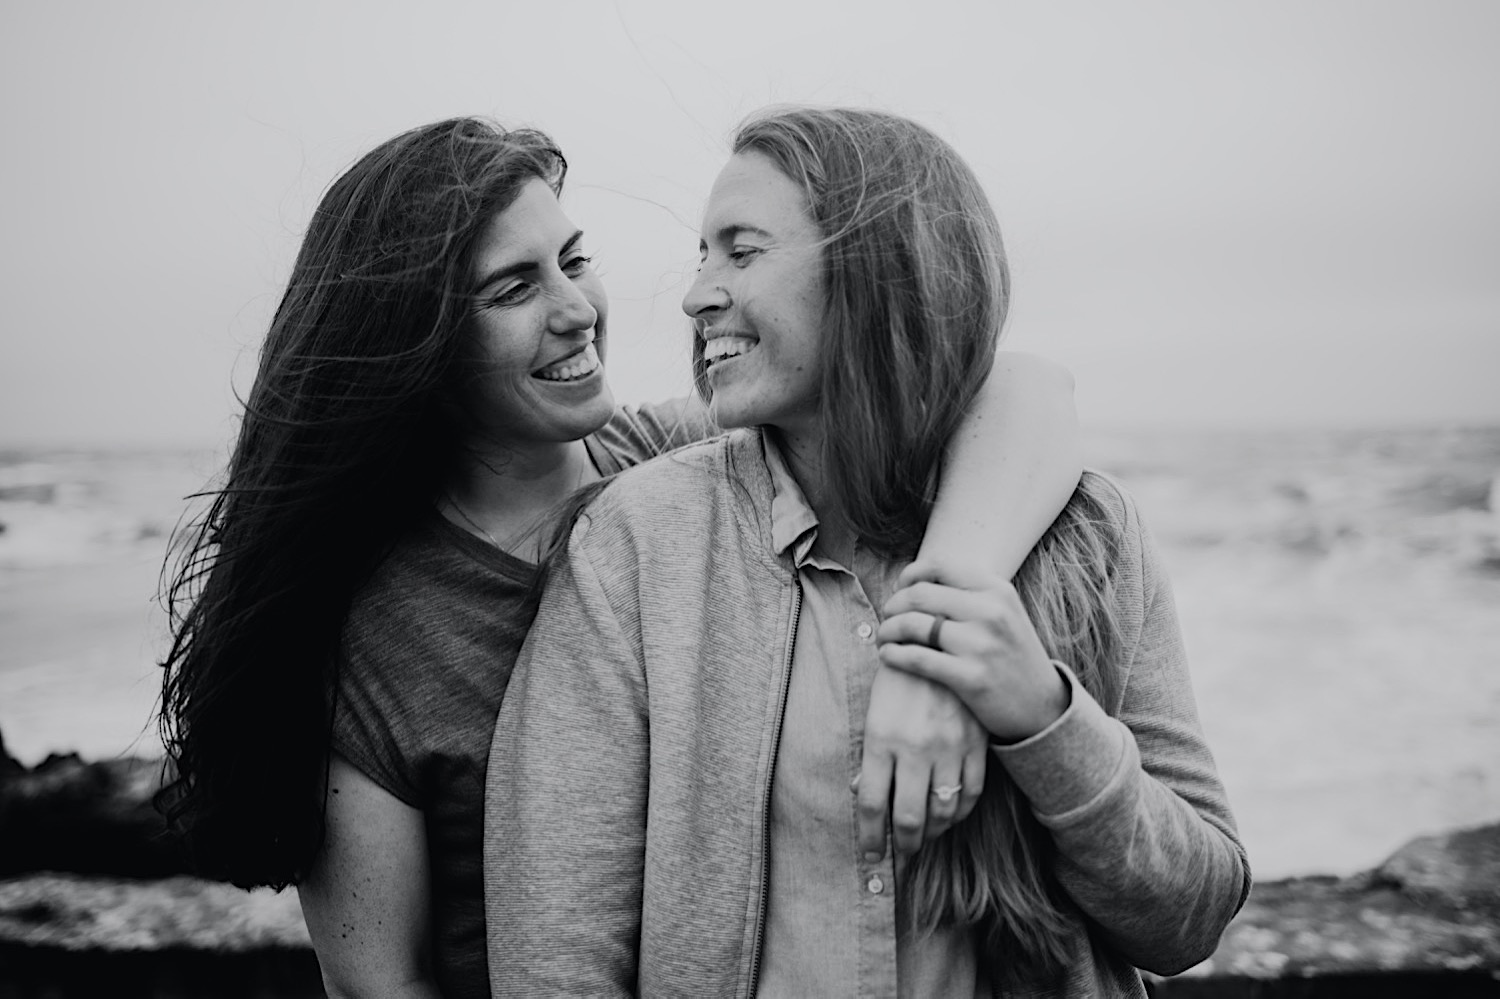 Two women with long hair are smiling and laughing while looking at each other and embracing. One has her arm around the other's shoulder.

They stand on the ruins of the Sutro Baths in San Francisco for their engagement session. Head to this post to see more photos from my bucket list location!